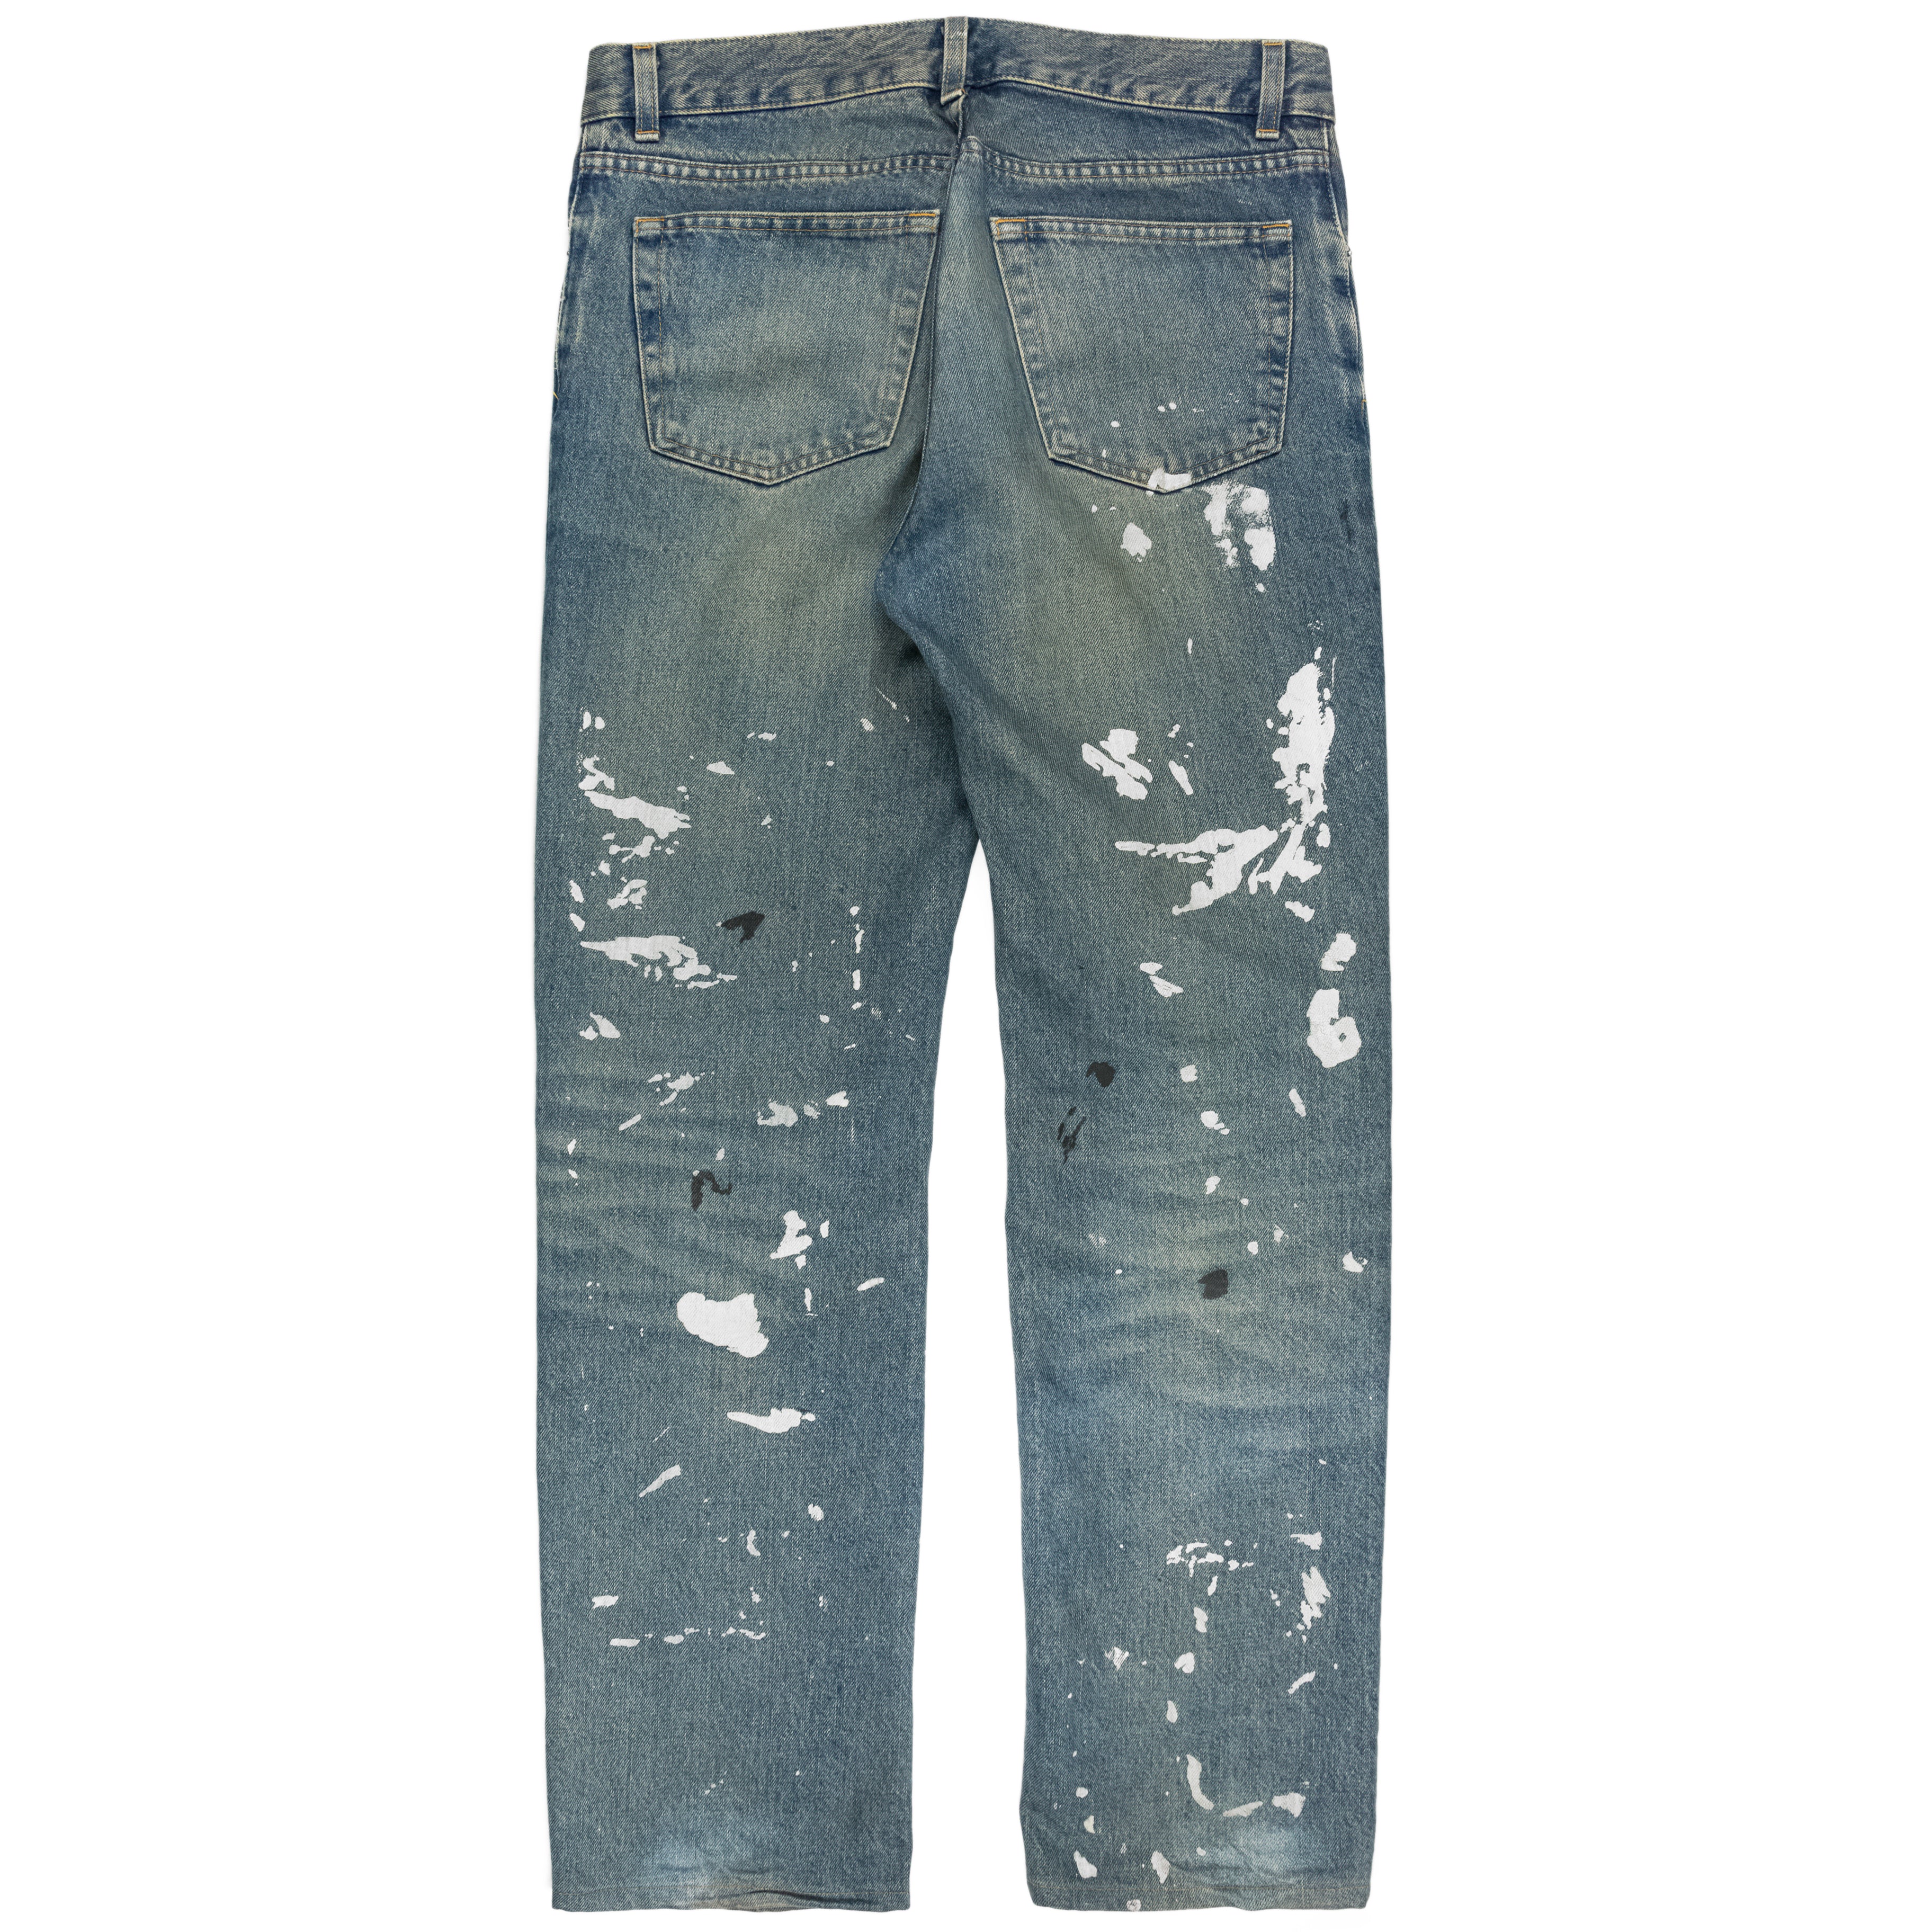 HELMUT LANG PAINTED JEANS 98AW - デニム/ジーンズ